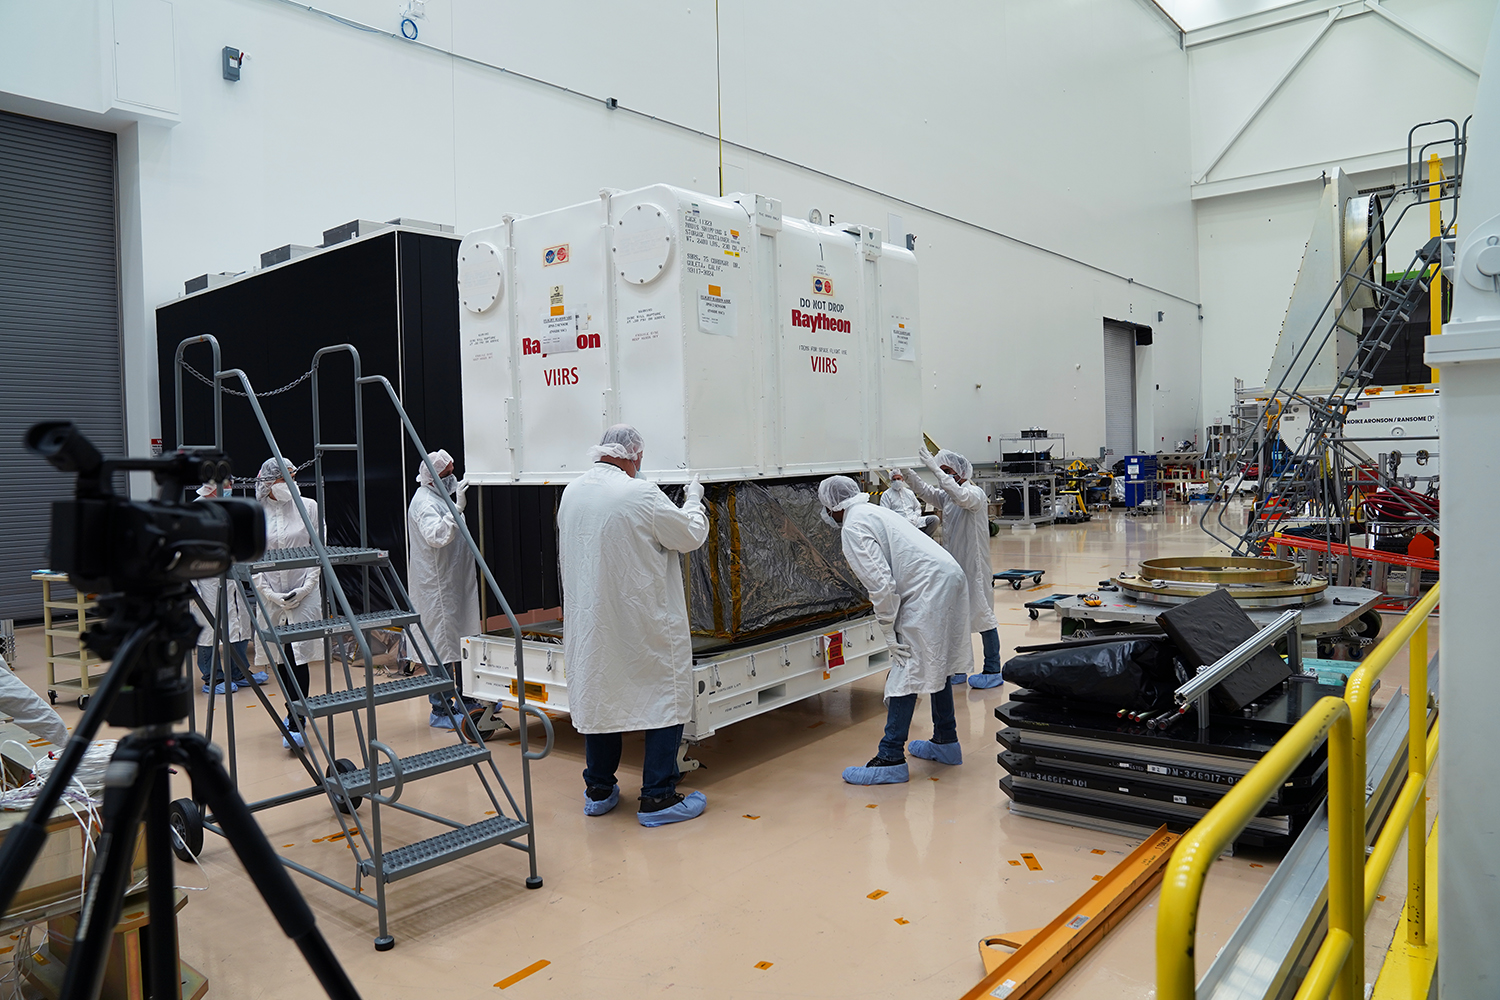 Engineers in white lab coats and hair nets help remove a large white box from a rack carrying the VIIRS instrument for JPSS-2. The instrument is wrapped in silver foil.